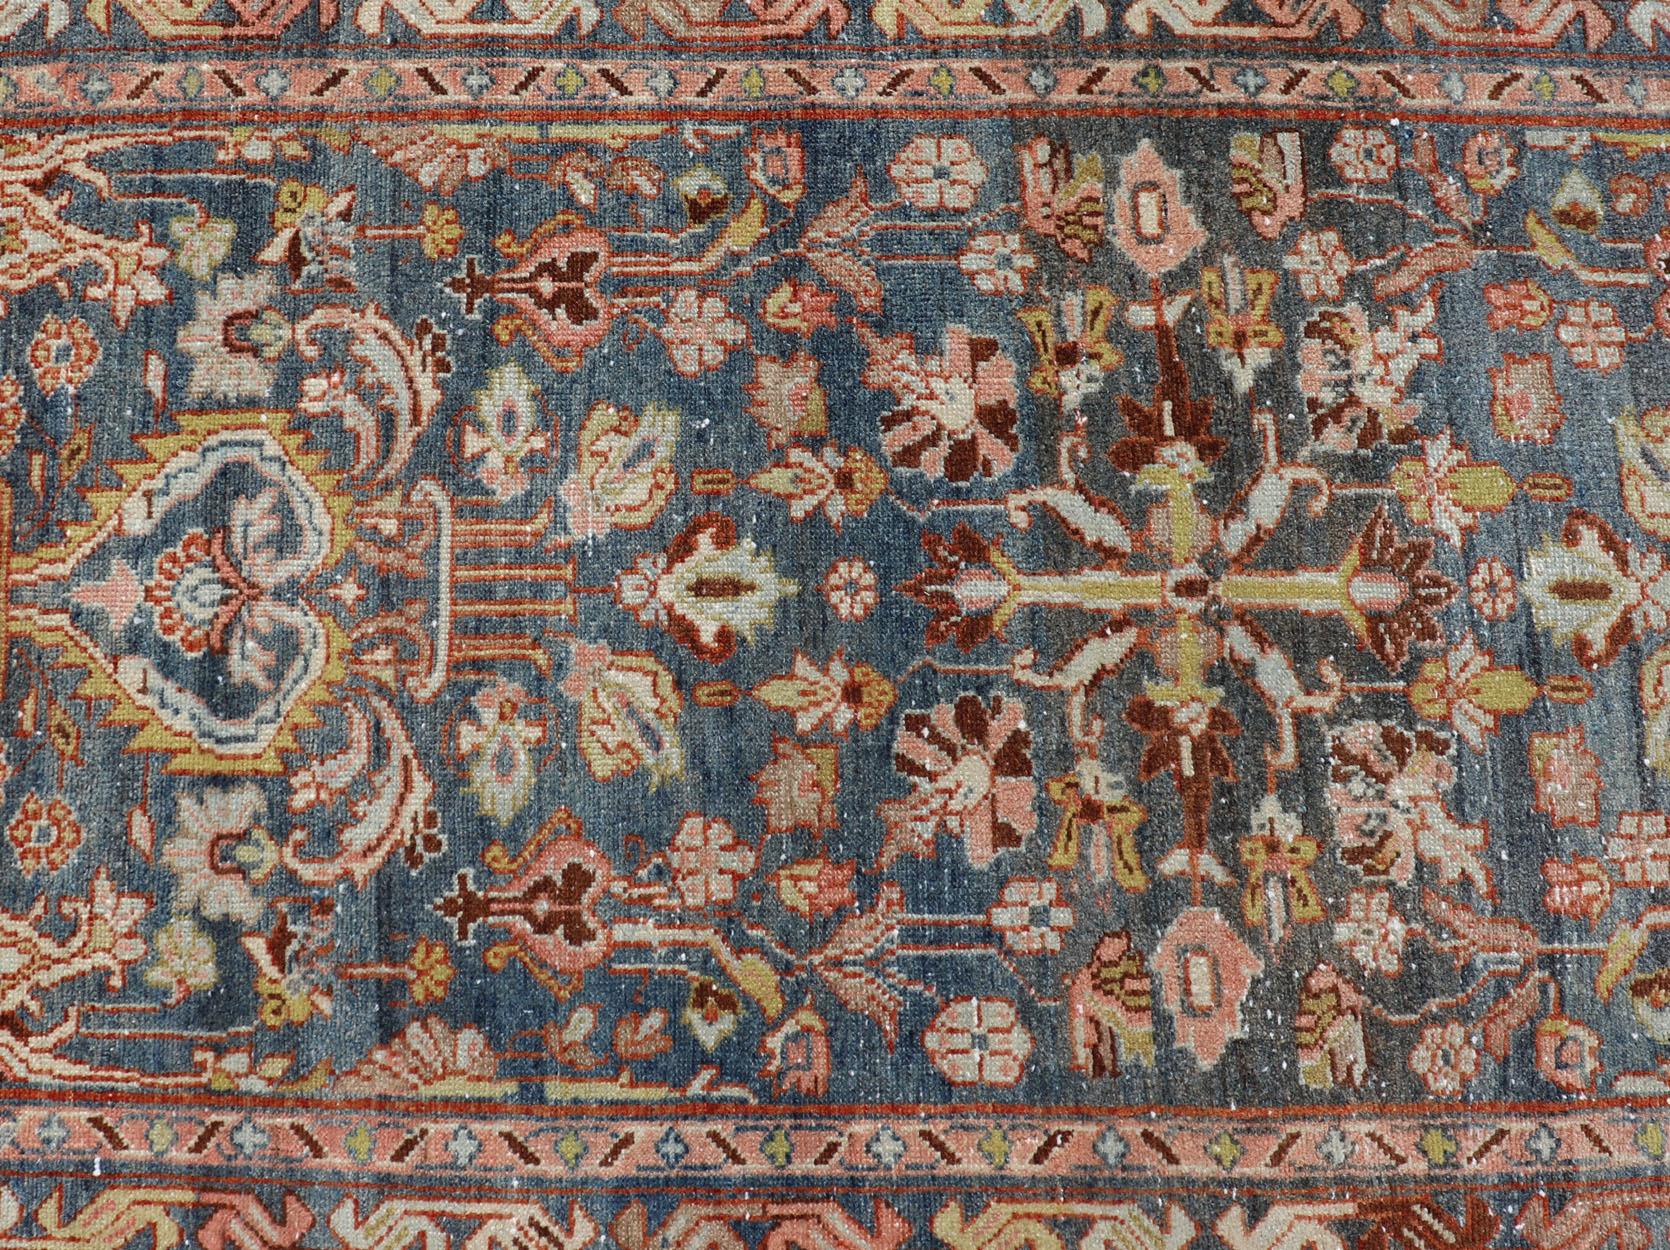 This antique Persian Malayer runner is rendered in rich colors, from the blue background to the pink, coral, light yellow, brown, and light blue shown in the design. The design is an all-over look with busy motifs spread across the entire field. The